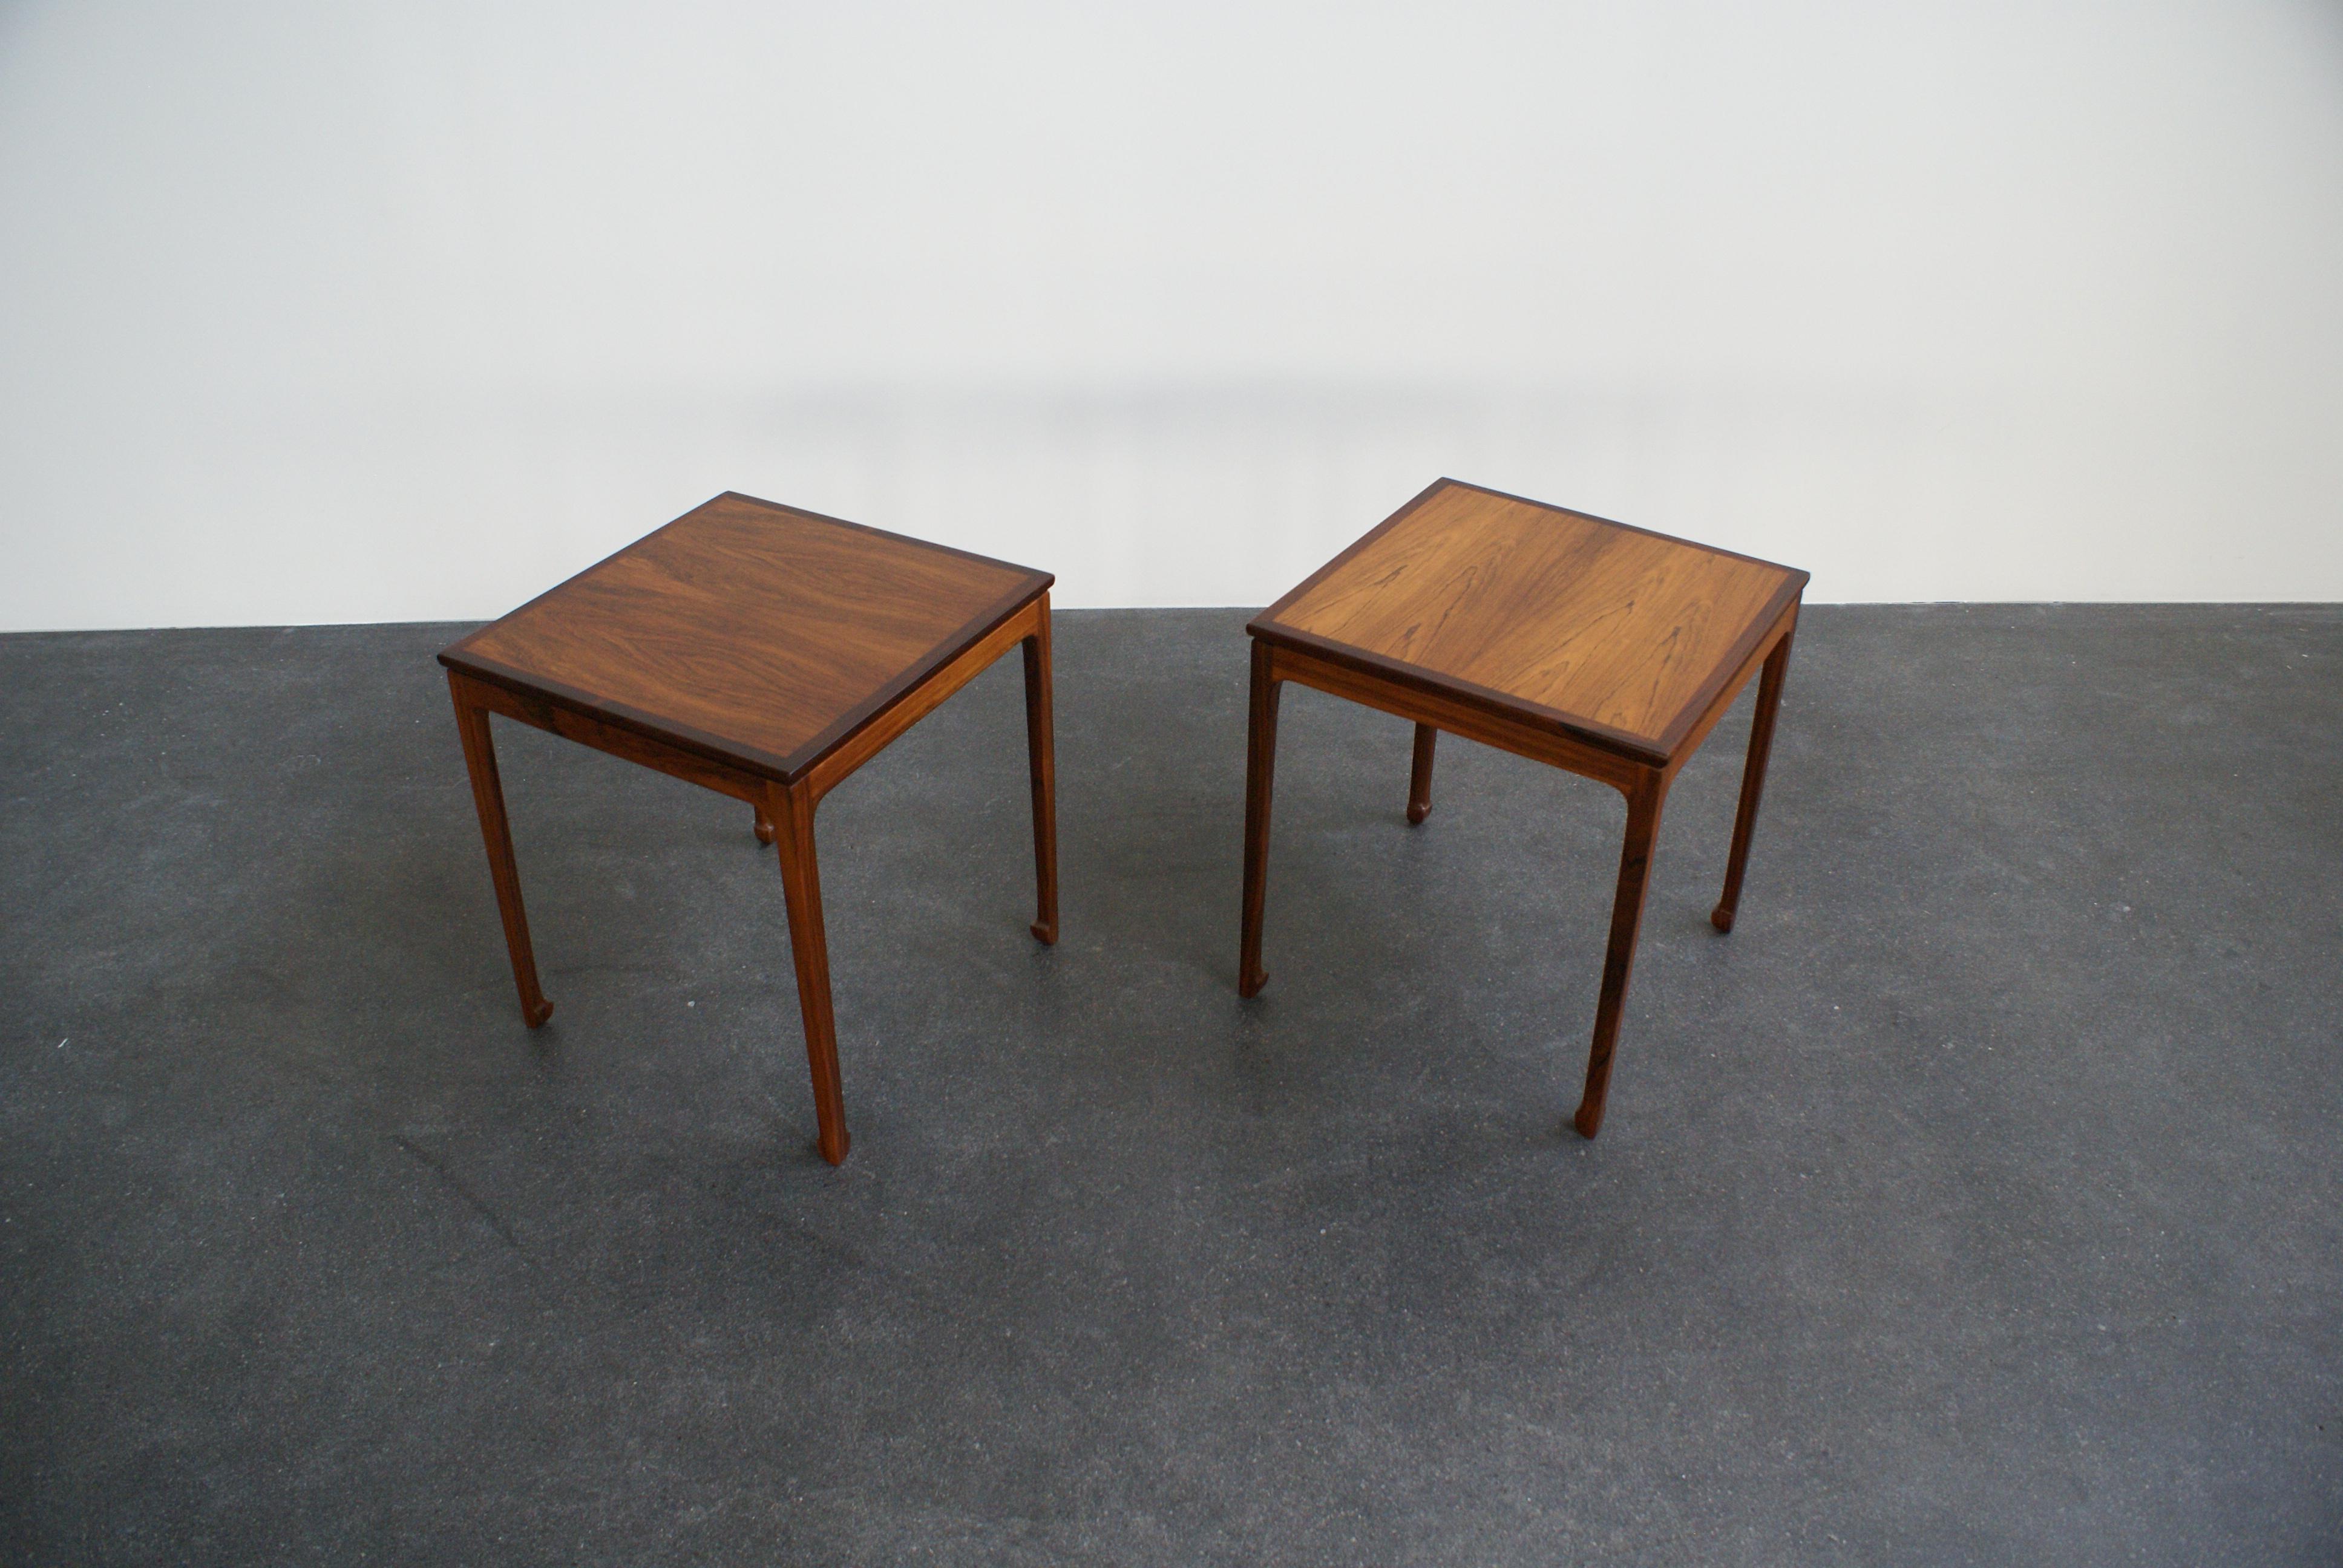 Ole Wanscher Pair of Side Tables in Brazilian Rosewood for A. J. Iversen, 1957 For Sale 9